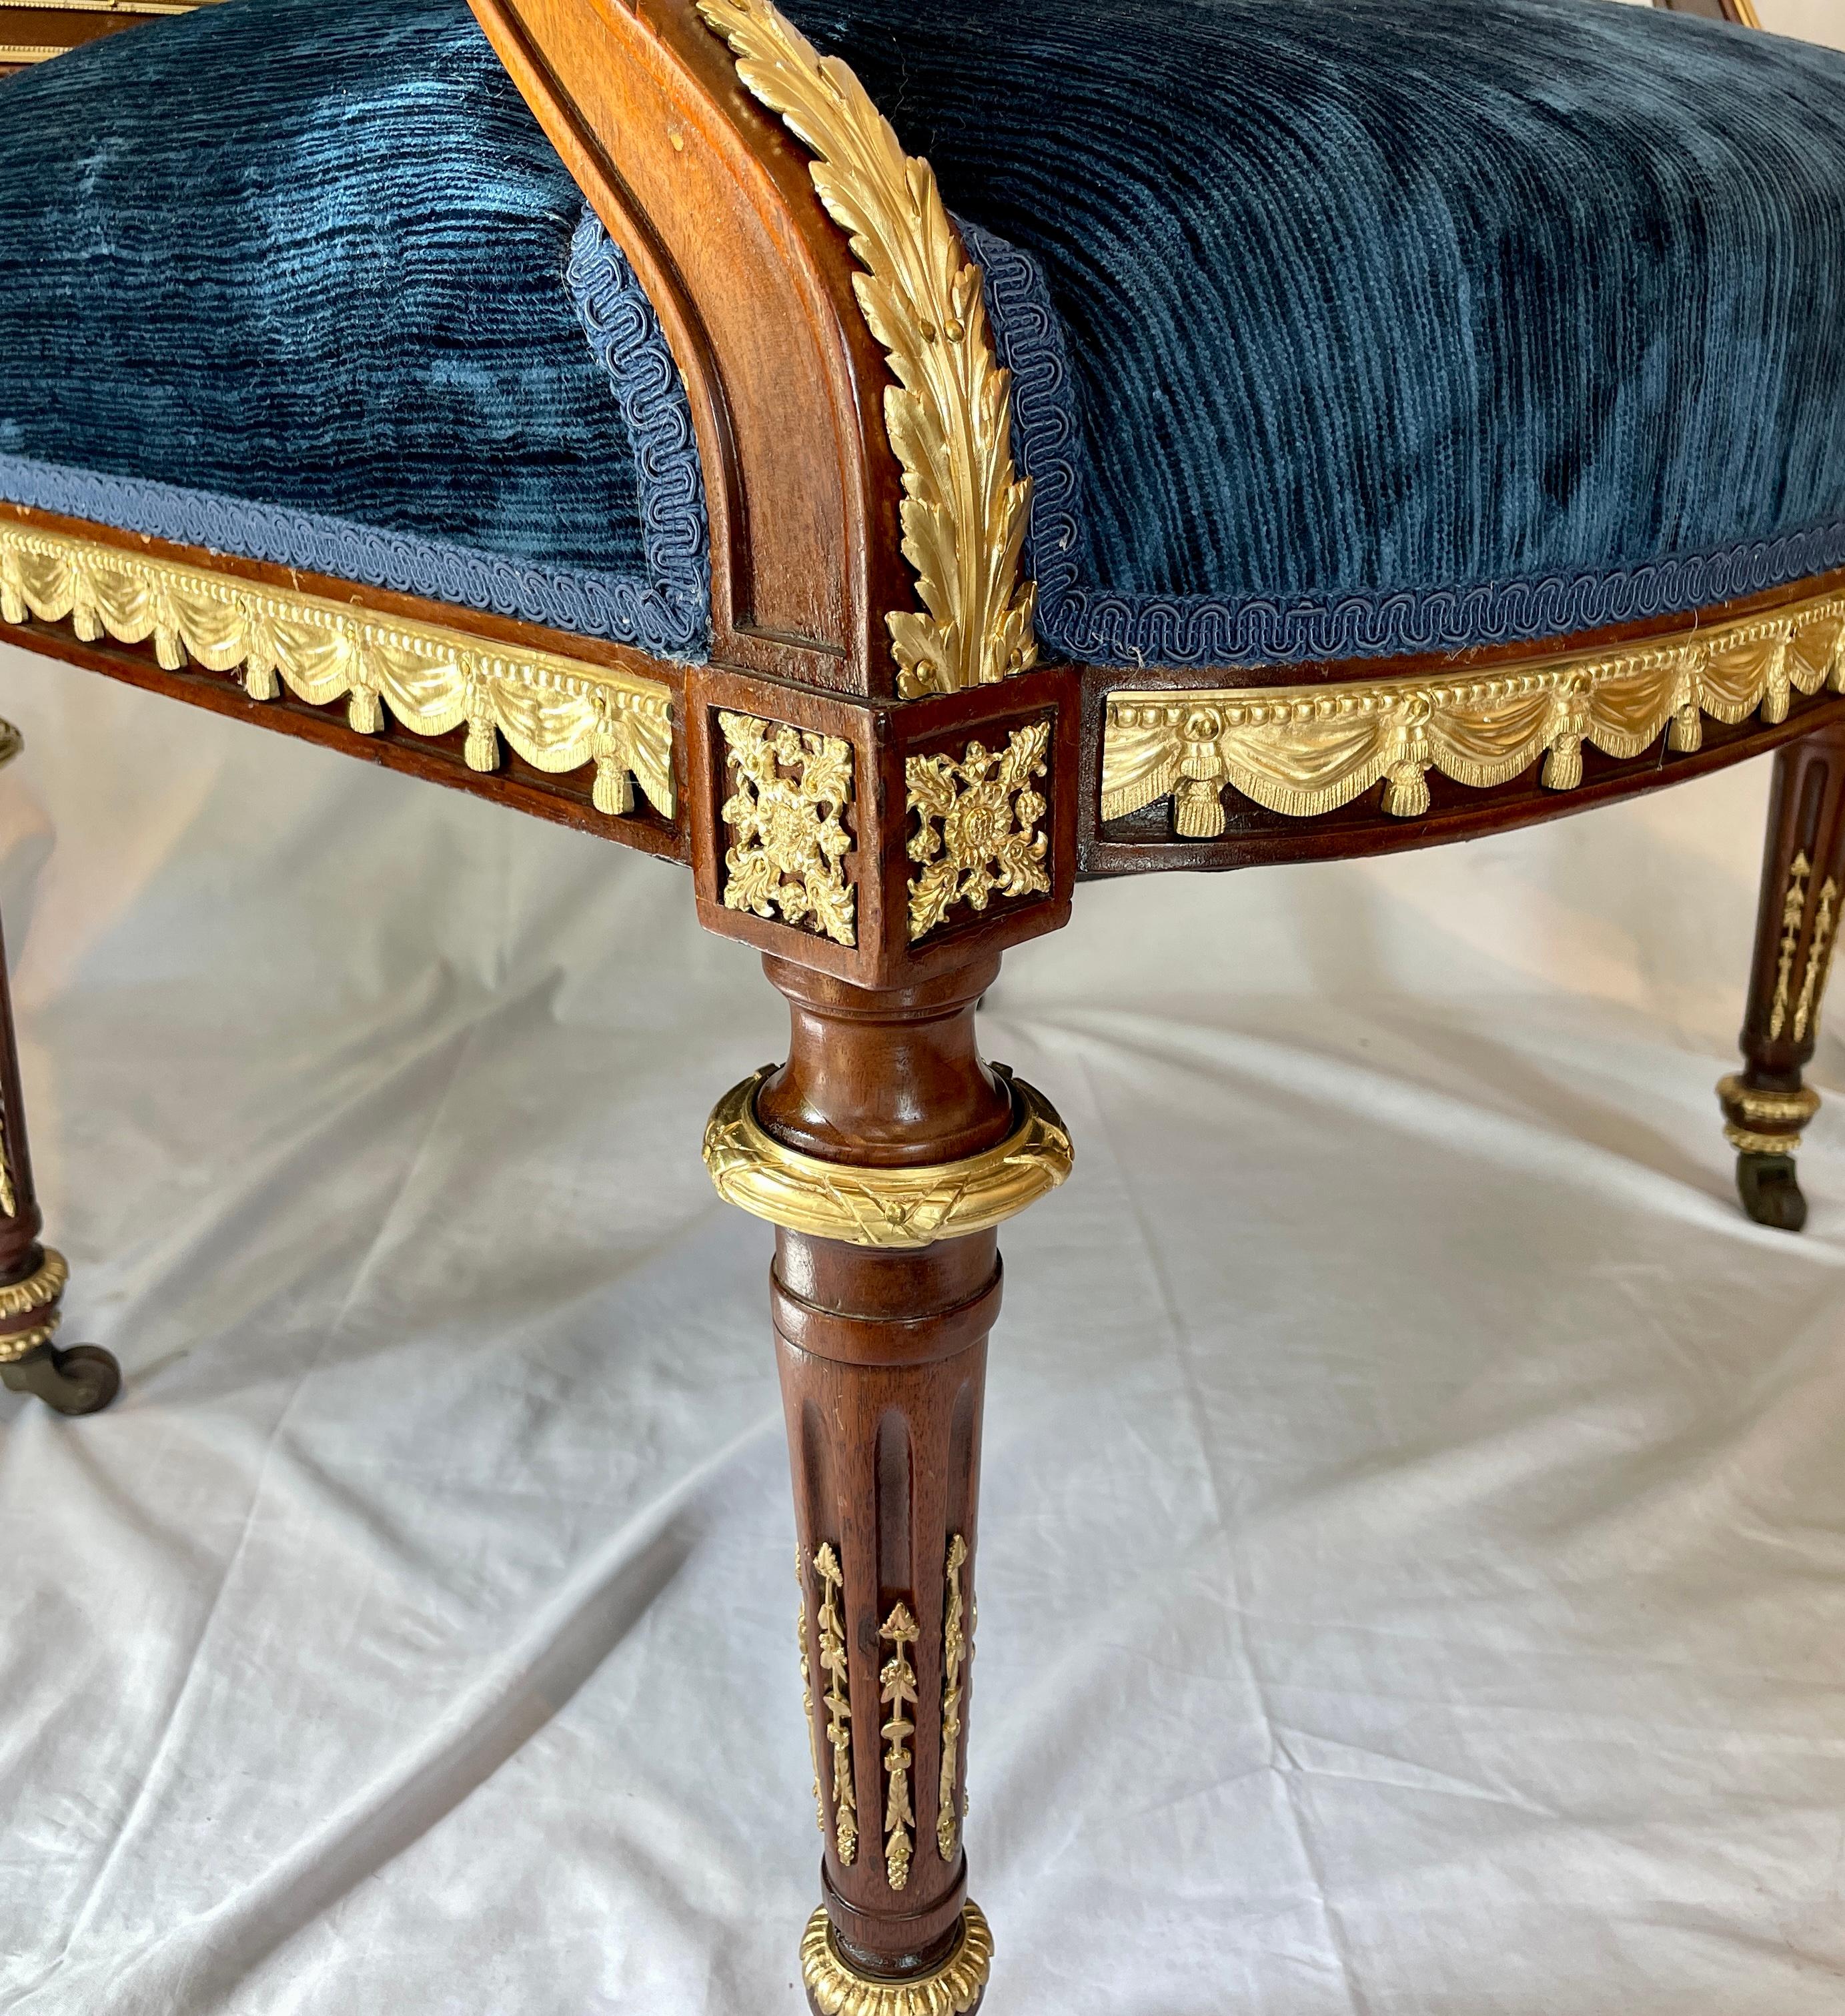 Antique French Gold Bronze & Mahogany Armchair with Delicate Trim, circa 1875 For Sale 3